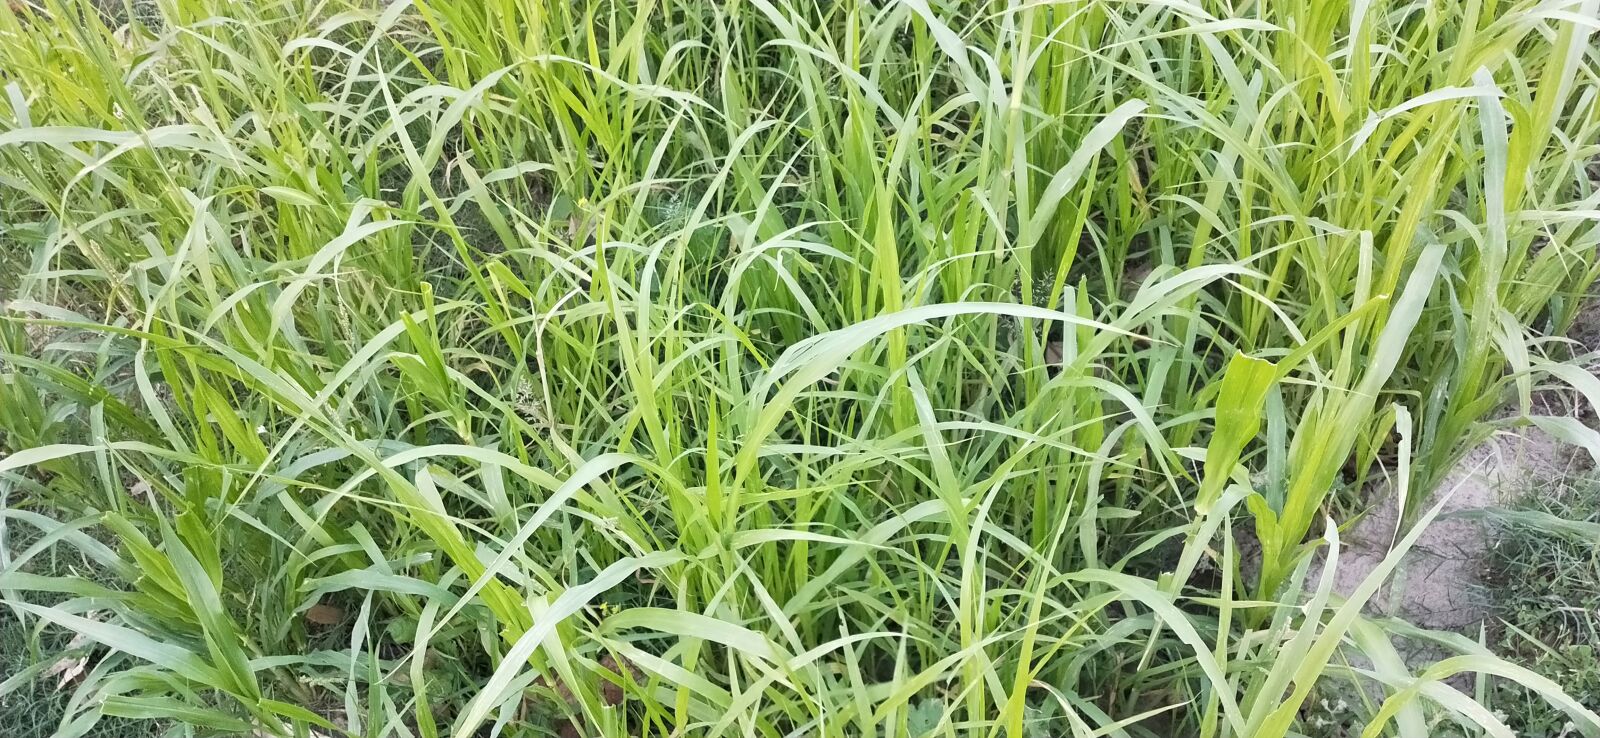 OPPO Realme 2 Pro sample photo. Grass, root, field photography